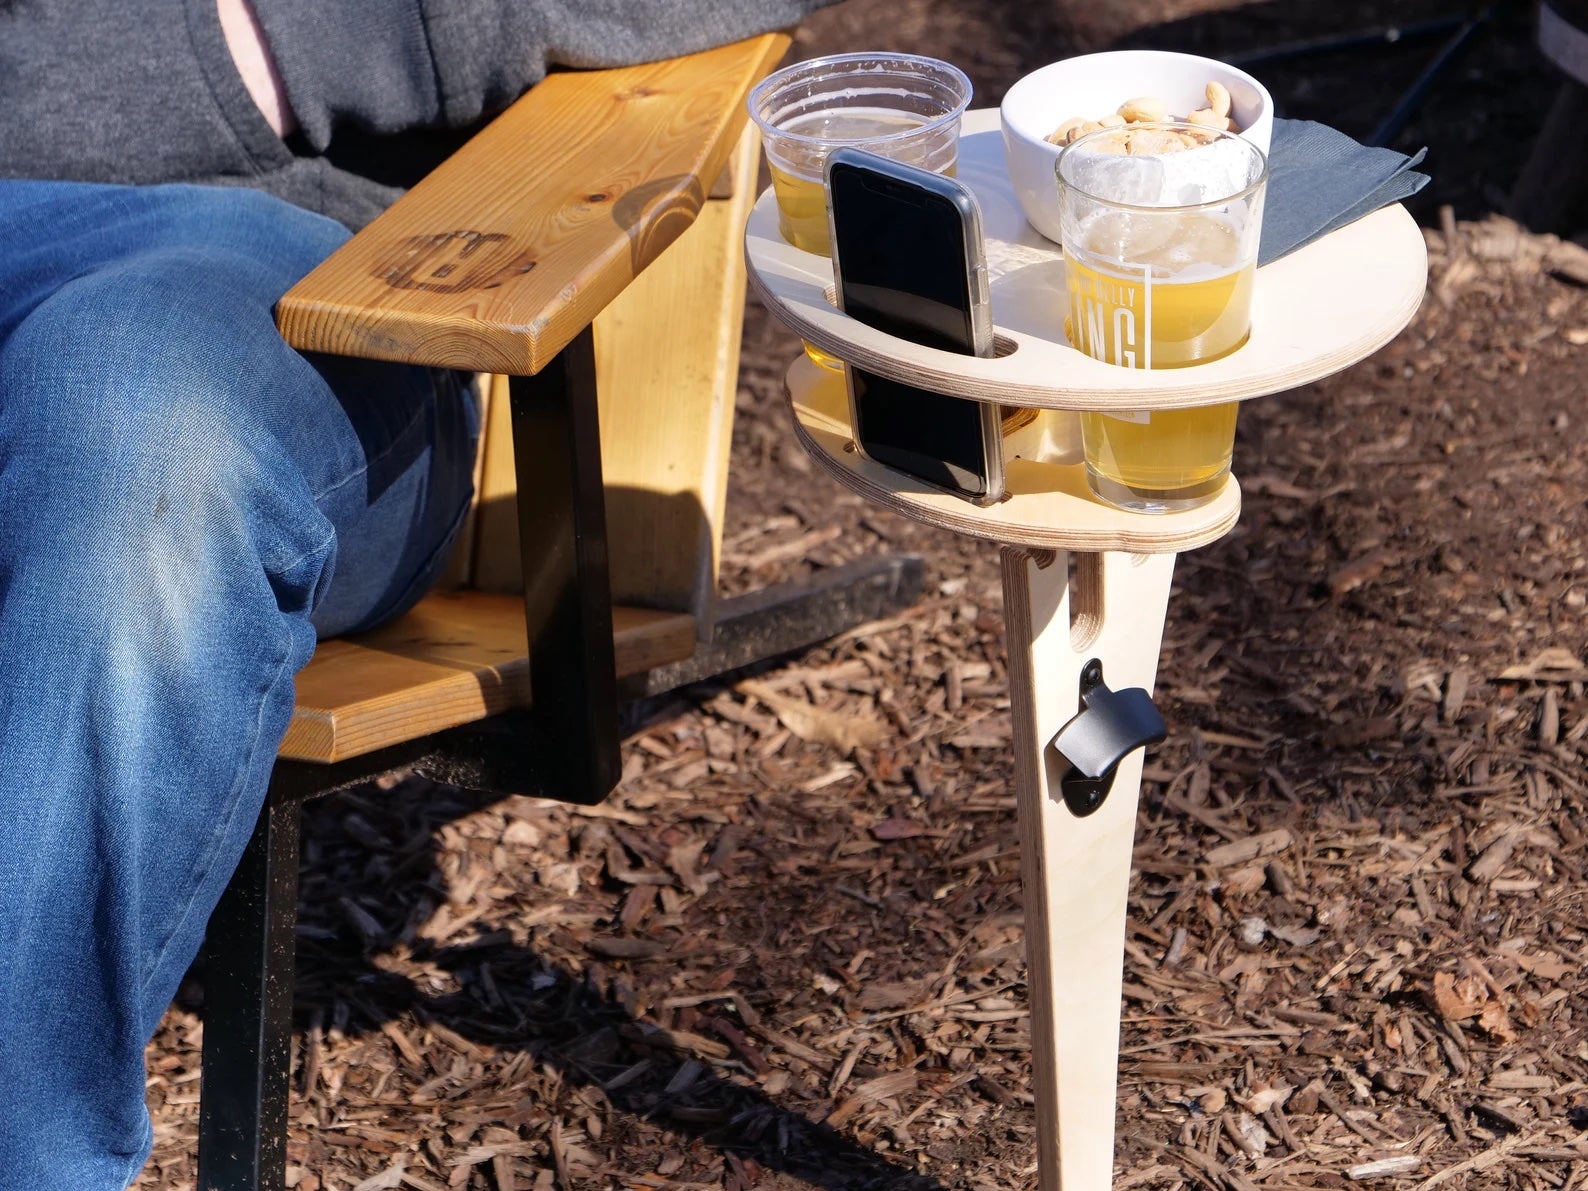 the light colored beer table holding two cups of beer, a phone, and bowl of snacks next to someone in a lawn chair